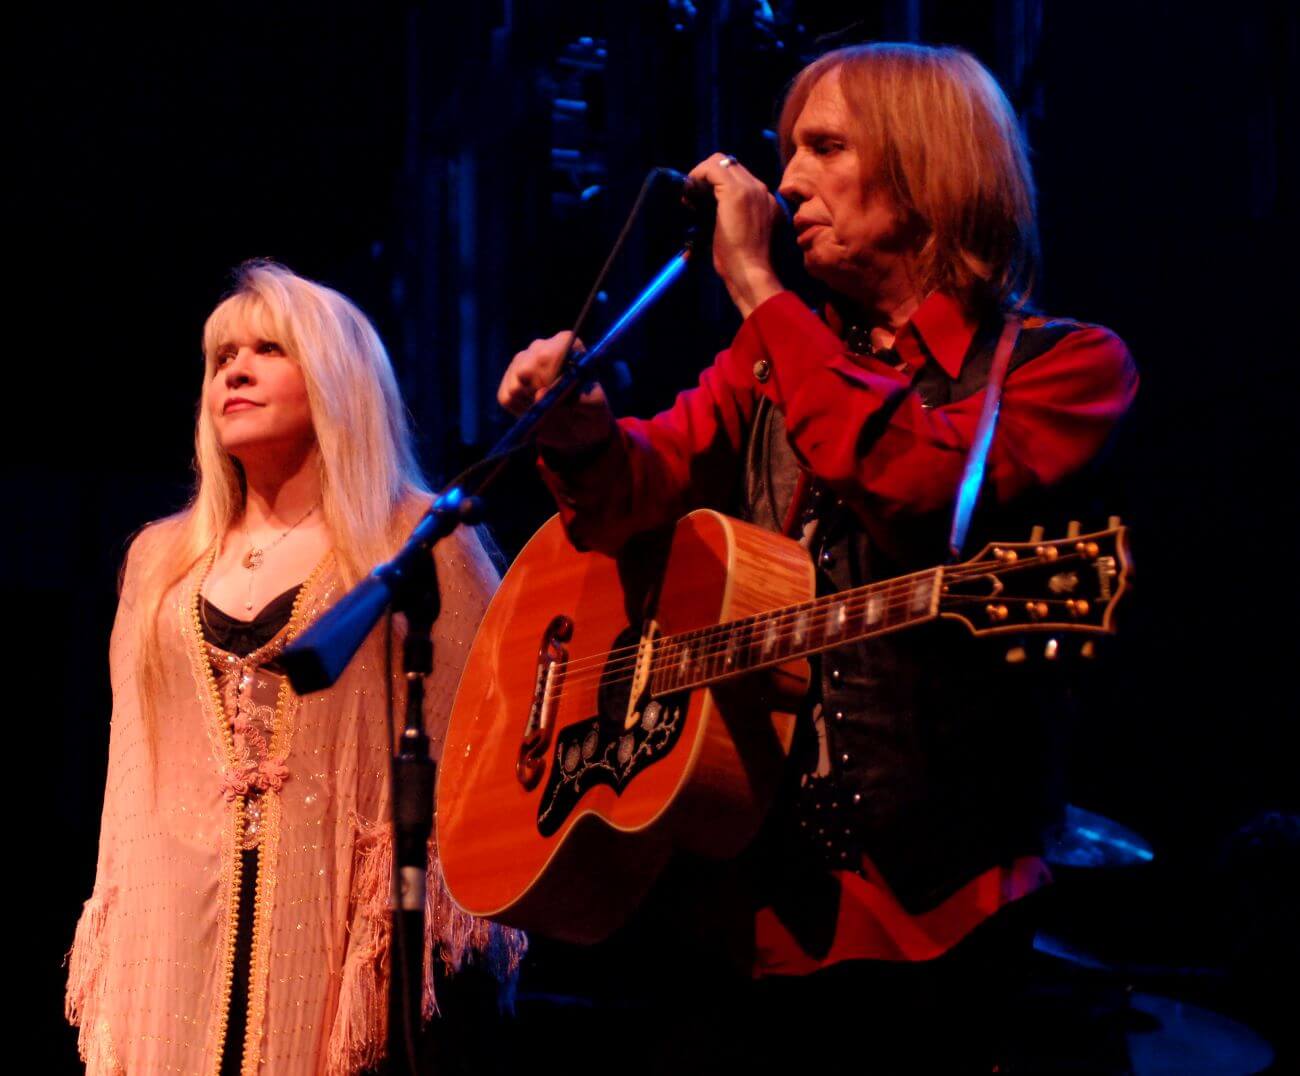 Stevie Nicks stands next to Tom Petty, who adjusts a microphone and holds a guitar.